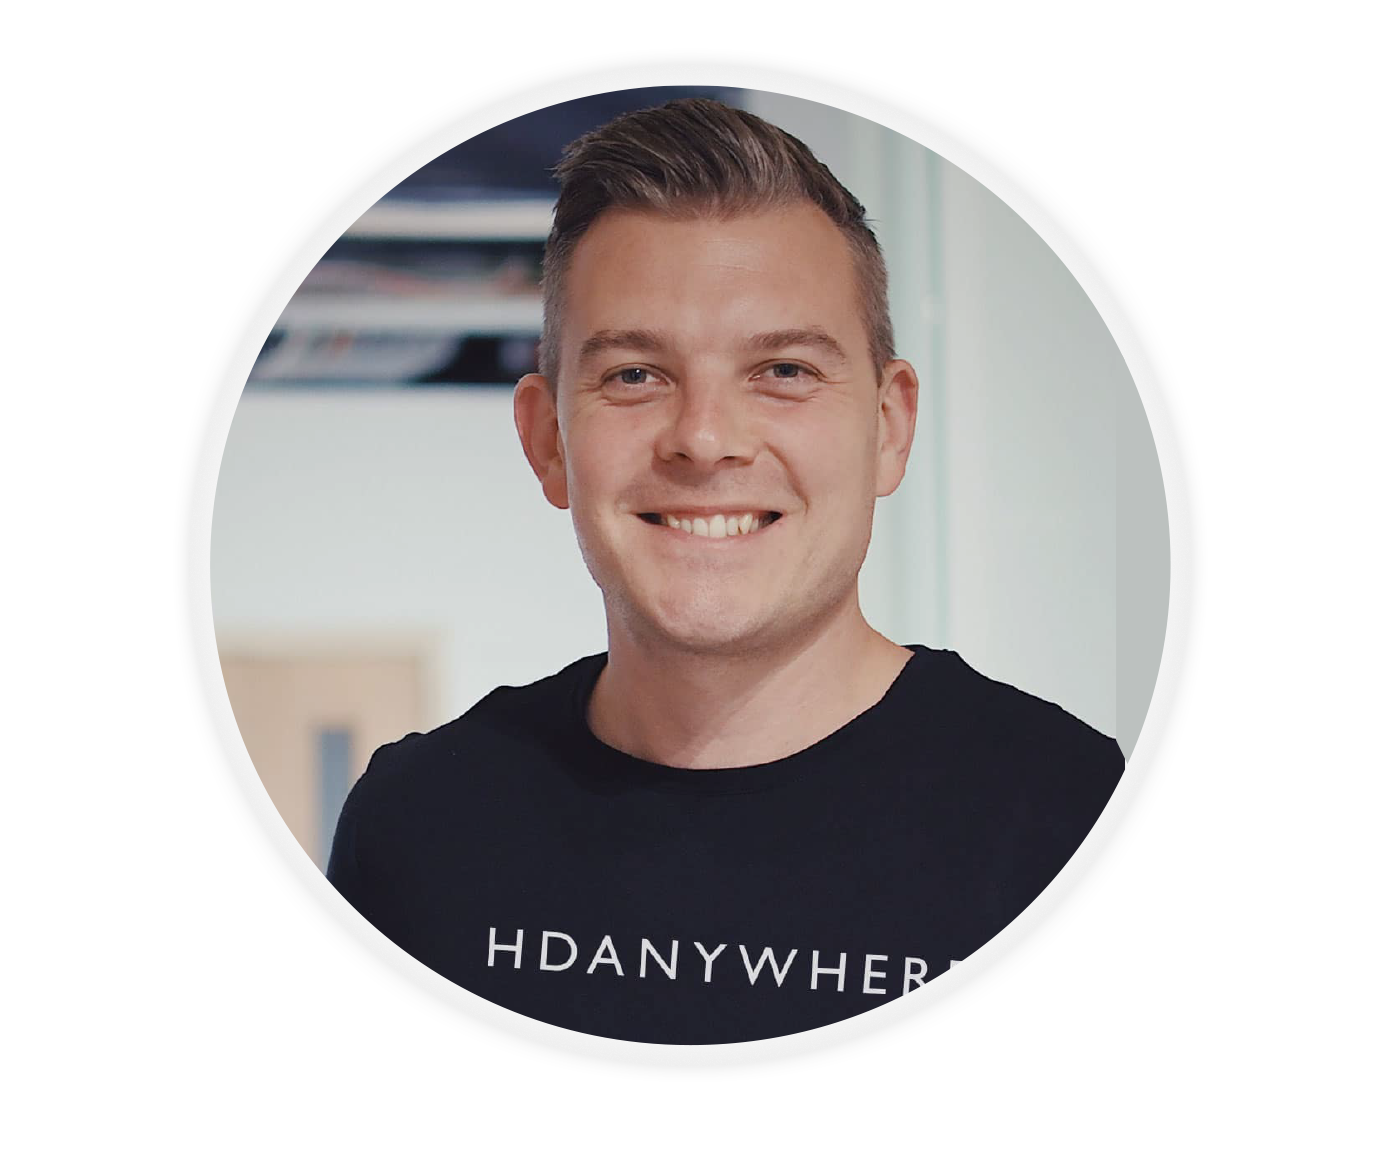 Chris Pinder HDANYWHERE CEO and CO-Founder